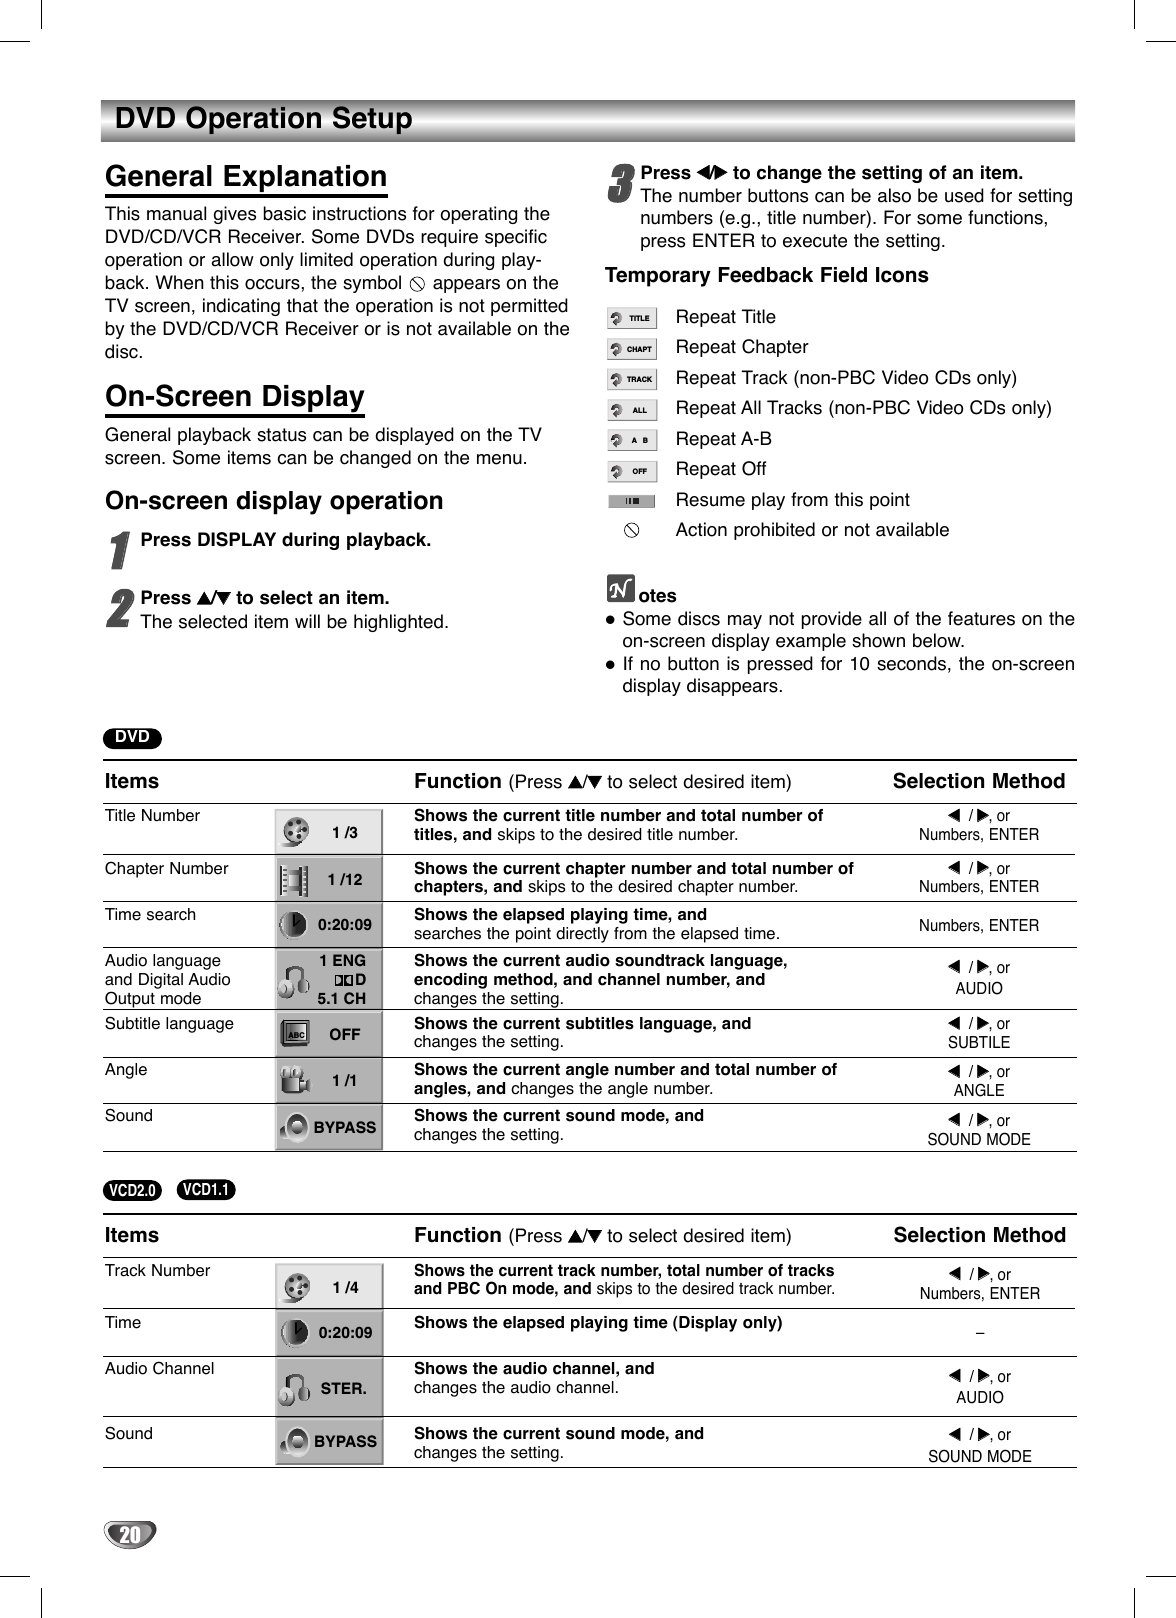 20DVD Operation SetupGeneral ExplanationThis manual gives basic instructions for operating theDVD/CD/VCR Receiver. Some DVDs require specificoperation or allow only limited operation during play-back. When this occurs, the symbol  appears on theTV screen, indicating that the operation is not permittedby the DVD/CD/VCR Receiver or is not available on thedisc.On-Screen DisplayGeneral playback status can be displayed on the TVscreen. Some items can be changed on the menu.On-screen display operation11Press DISPLAY during playback.22Press 33/44to select an item.The selected item will be highlighted.33Press 11/22to change the setting of an item. The number buttons can be also be used for settingnumbers (e.g., title number). For some functions,press ENTER to execute the setting.Temporary Feedback Field IconsRepeat TitleRepeat ChapterRepeat Track (non-PBC Video CDs only)Repeat All Tracks (non-PBC Video CDs only)Repeat A-BRepeat OffResume play from this pointAction prohibited or not availableotesSome discs may not provide all of the features on theon-screen display example shown below.If no button is pressed for 10 seconds, the on-screendisplay disappears.OFFA   BALLTRACKCHAPTTITLEItemsTitle NumberChapter NumberTime searchAudio language and Digital Audio Output modeSubtitle languageAngleSoundFunction (Press 33/44to select desired item)Shows the current title number and total number oftitles, and skips to the desired title number.Shows the current chapter number and total number ofchapters, and skips to the desired chapter number.Shows the elapsed playing time, andsearches the point directly from the elapsed time.Shows the current audio soundtrack language,encoding method, and channel number, andchanges the setting.Shows the current subtitles language, andchanges the setting.Shows the current angle number and total number ofangles, and changes the angle number.Shows the current sound mode, andchanges the setting.Selection Method11  / 22,orNumbers, ENTER11  / 22,orNumbers, ENTERNumbers, ENTER11  / 22,orAUDIO11  / 22,orSUBTILE11  / 22,orANGLE11  / 22,orSOUND MODE1 /31 /120:20:091 ENGD5.1 CHOFF1 /1BYPASSABCItemsTrack NumberTimeAudio ChannelSoundFunction (Press 33/44to select desired item)Shows the current track number, total number of tracksand PBC On mode, and skips to the desired track number.Shows the elapsed playing time (Display only)Shows the audio channel, andchanges the audio channel.Shows the current sound mode, andchanges the setting.Selection Method11  / 22,orNumbers, ENTER–11  / 22,orAUDIO11  / 22,orSOUND MODE1 /40:20:09STER.BYPASSVCD2.0 VCD1.1DVD